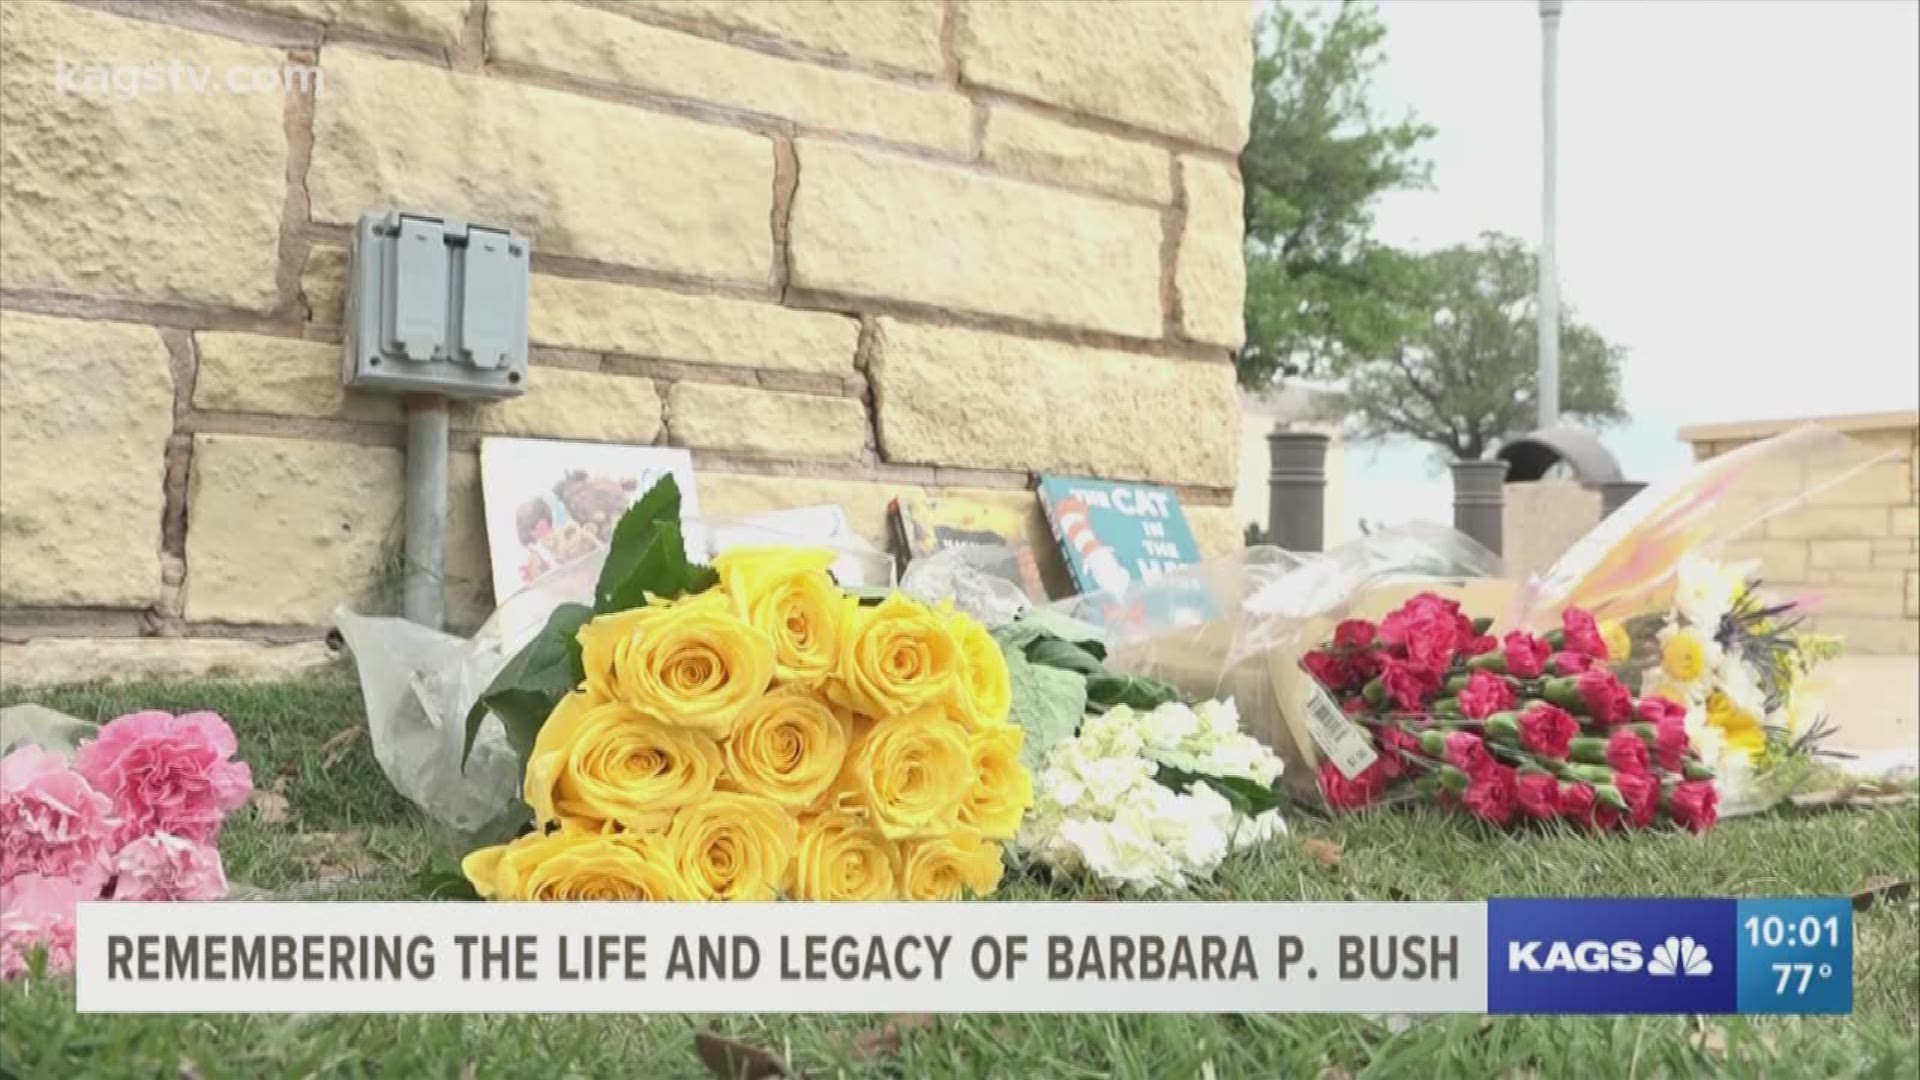 visitors from across Texas pay their respect to the former First Lady